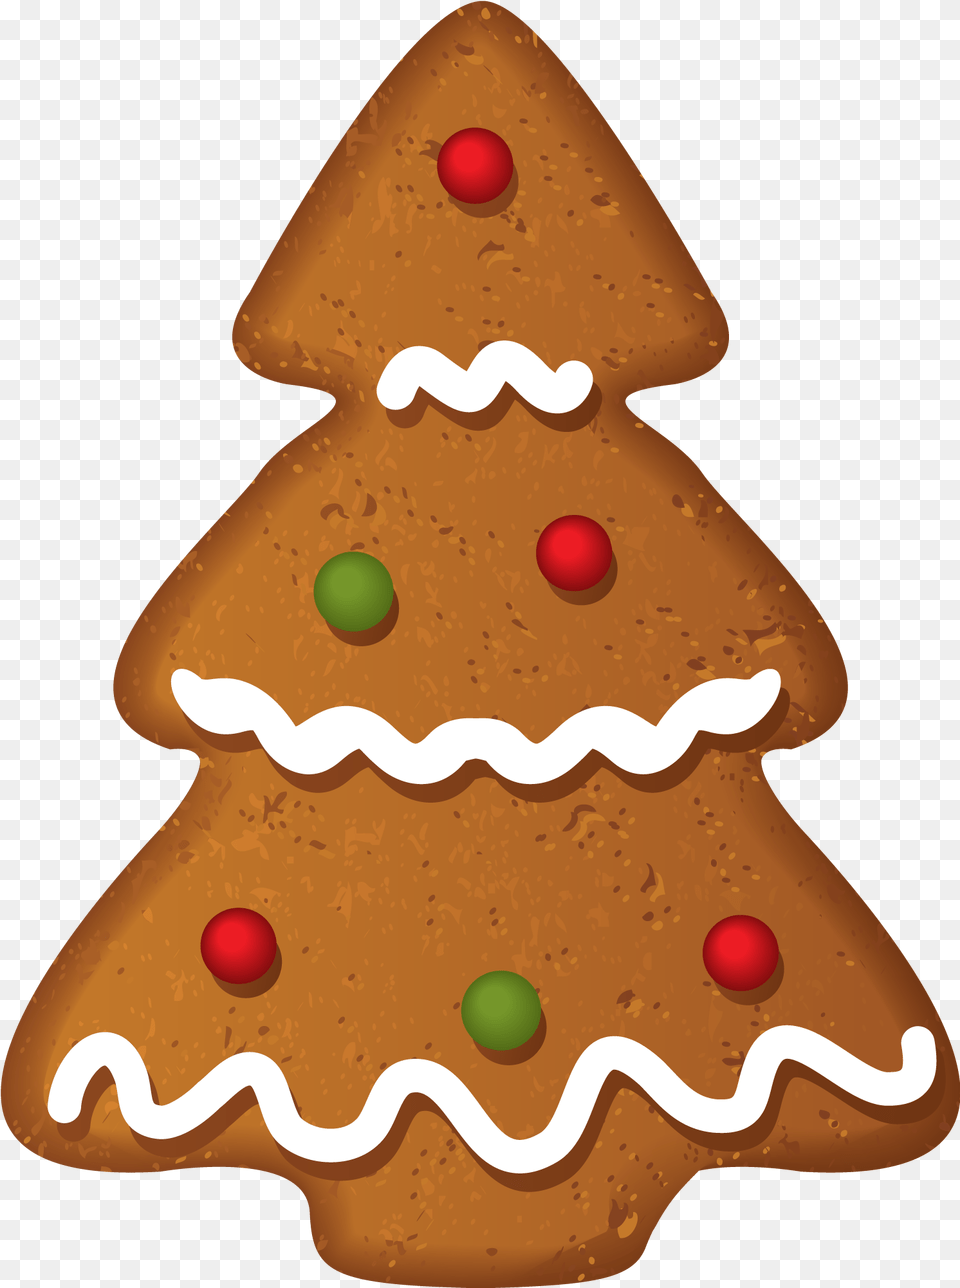 Christmas Cookie Transparent Christmas Cookies Transparent, Food, Sweets, Gingerbread Png